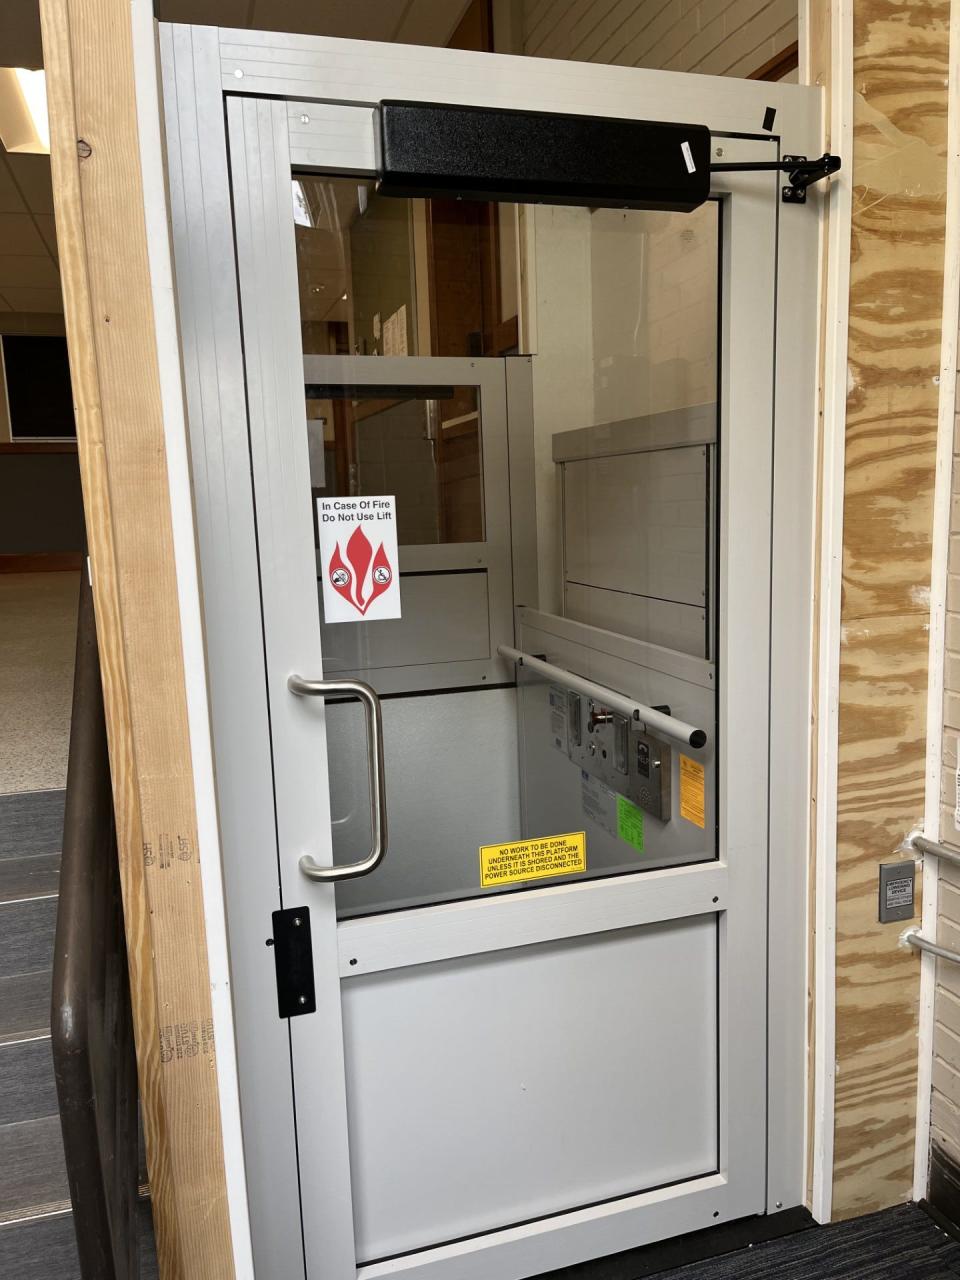 A new wheelchair lift located inside the ADA accessible entrance at the Washington School Apartments, as seen, Tuesday, May 14 in Sheboygan, Wis.